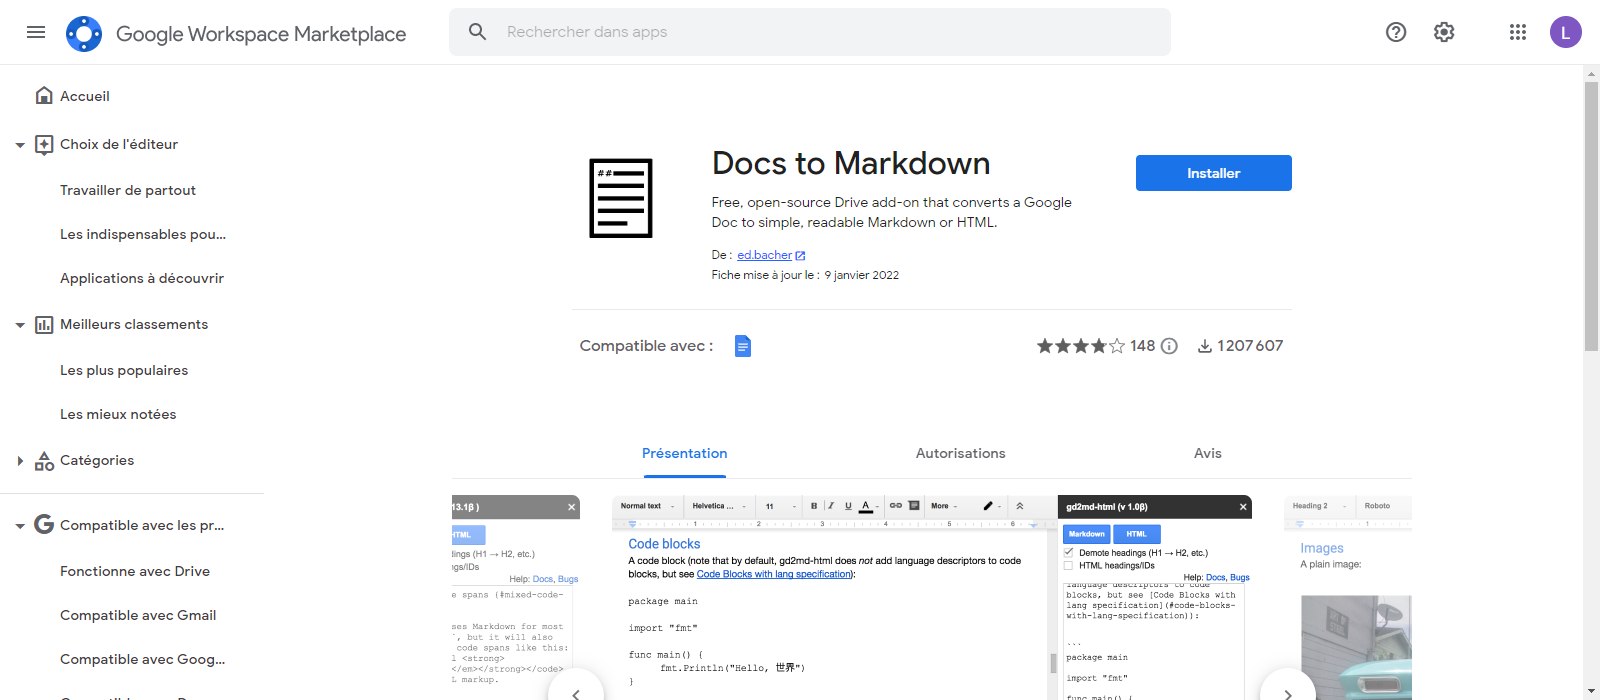 Docs to Markdown